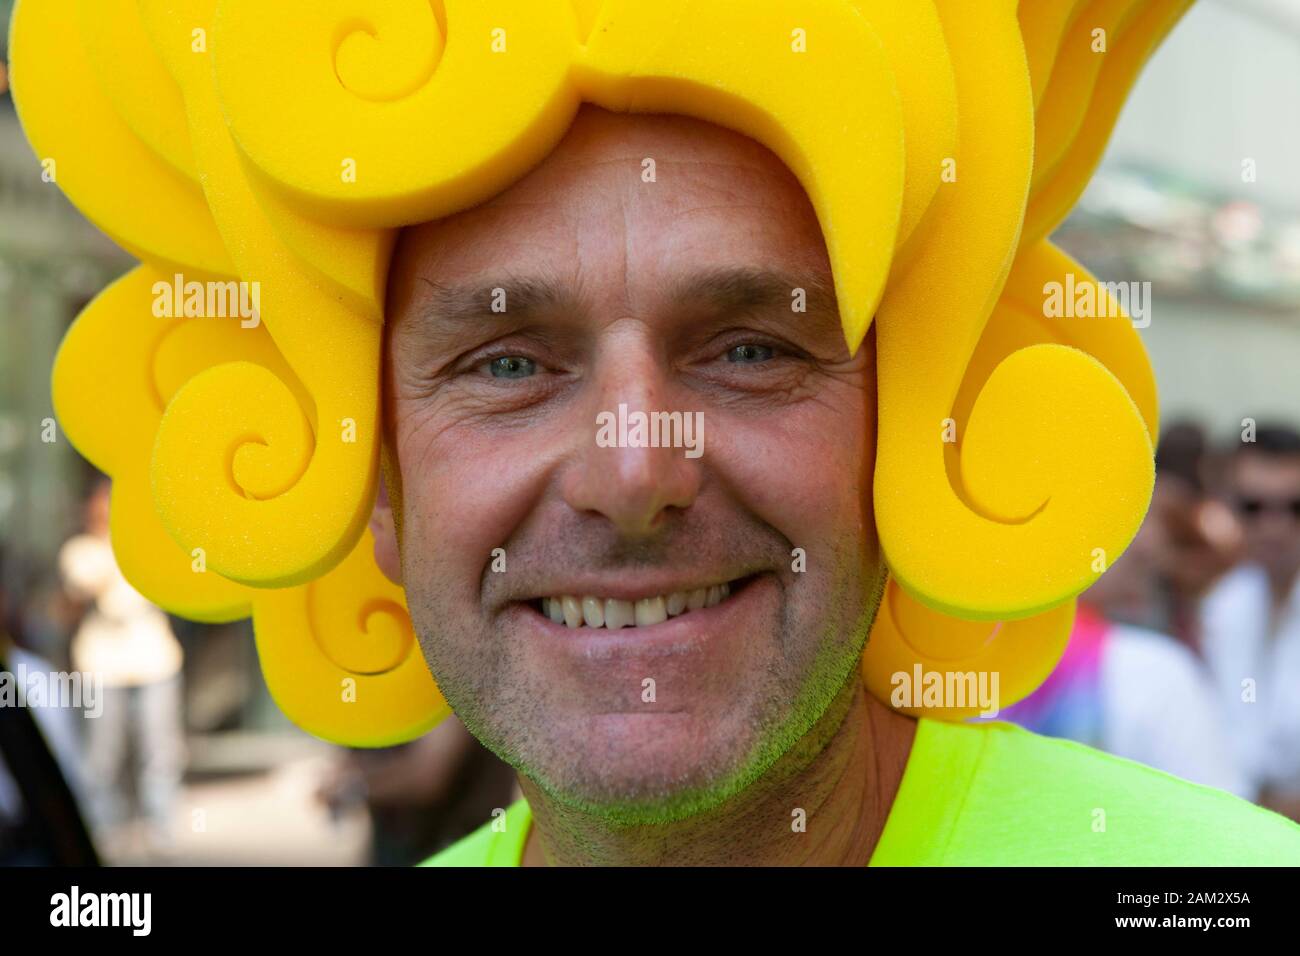 Pride parade participant in yellow wig made out of sponge, Vancouver Pride Festival 2014, Vancouver, Canada Stock Photo